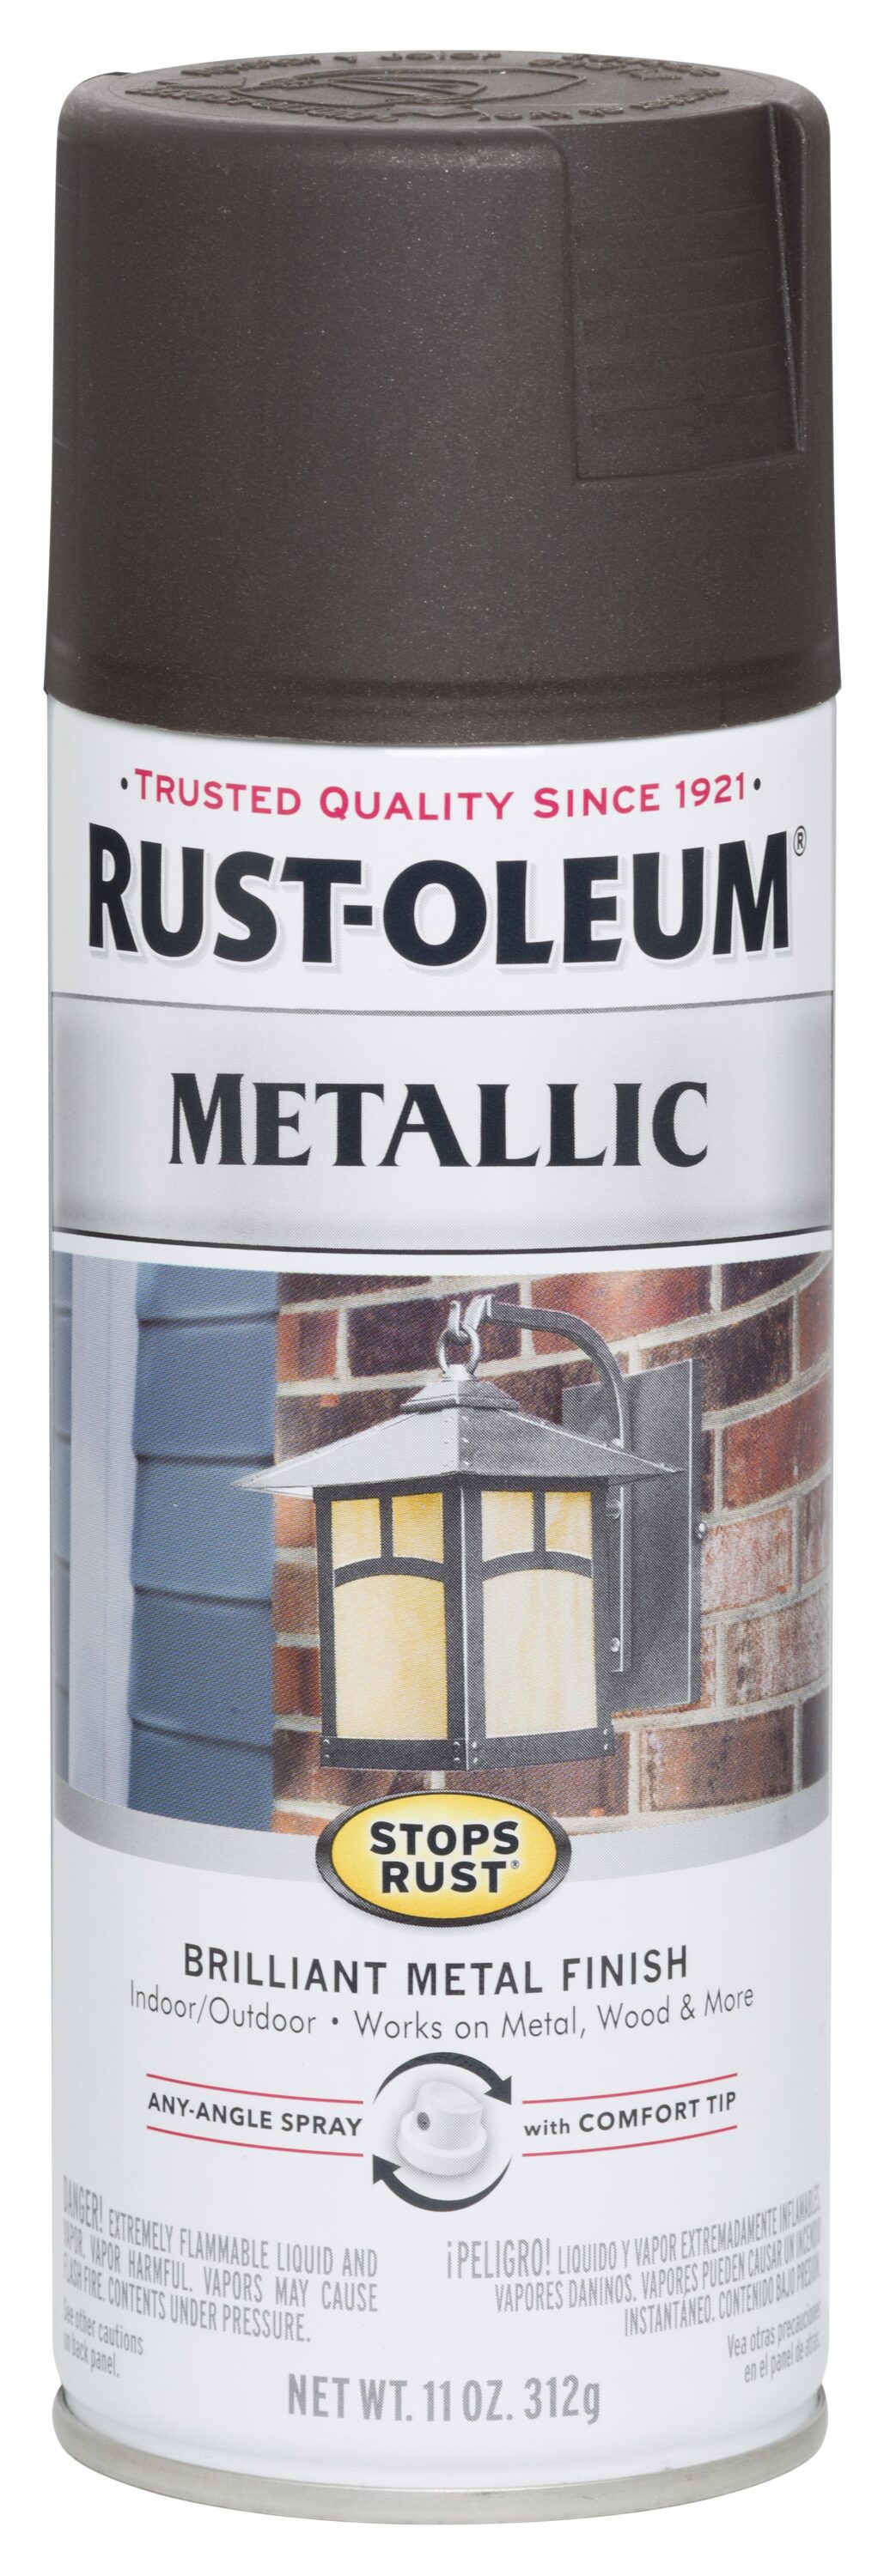 DIY Lamp Transformation with Rustoleum Oiled Bronze Spray Paint